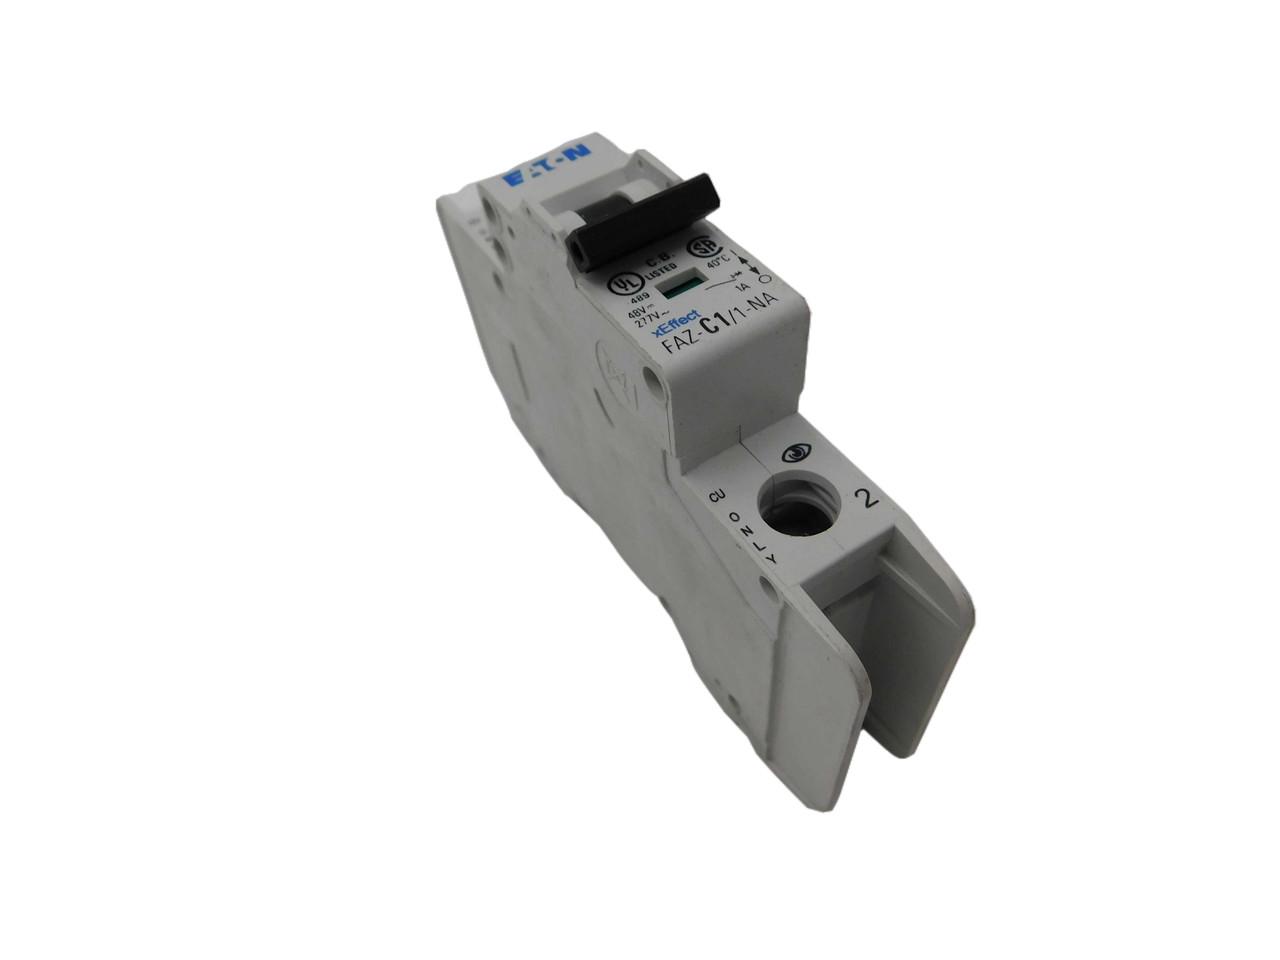 Eaton FAZ-C1/1-NA 277/480 VAC 50/60 Hz, 1 A, 1-Pole, 10/14 kA, 5 to 10 x Rated Current, Screw Terminal, DIN Rail Mount, Standard Packaging, C-Curve, Current Limiting, Thermal Magnetic, Miniature Circuit Breaker